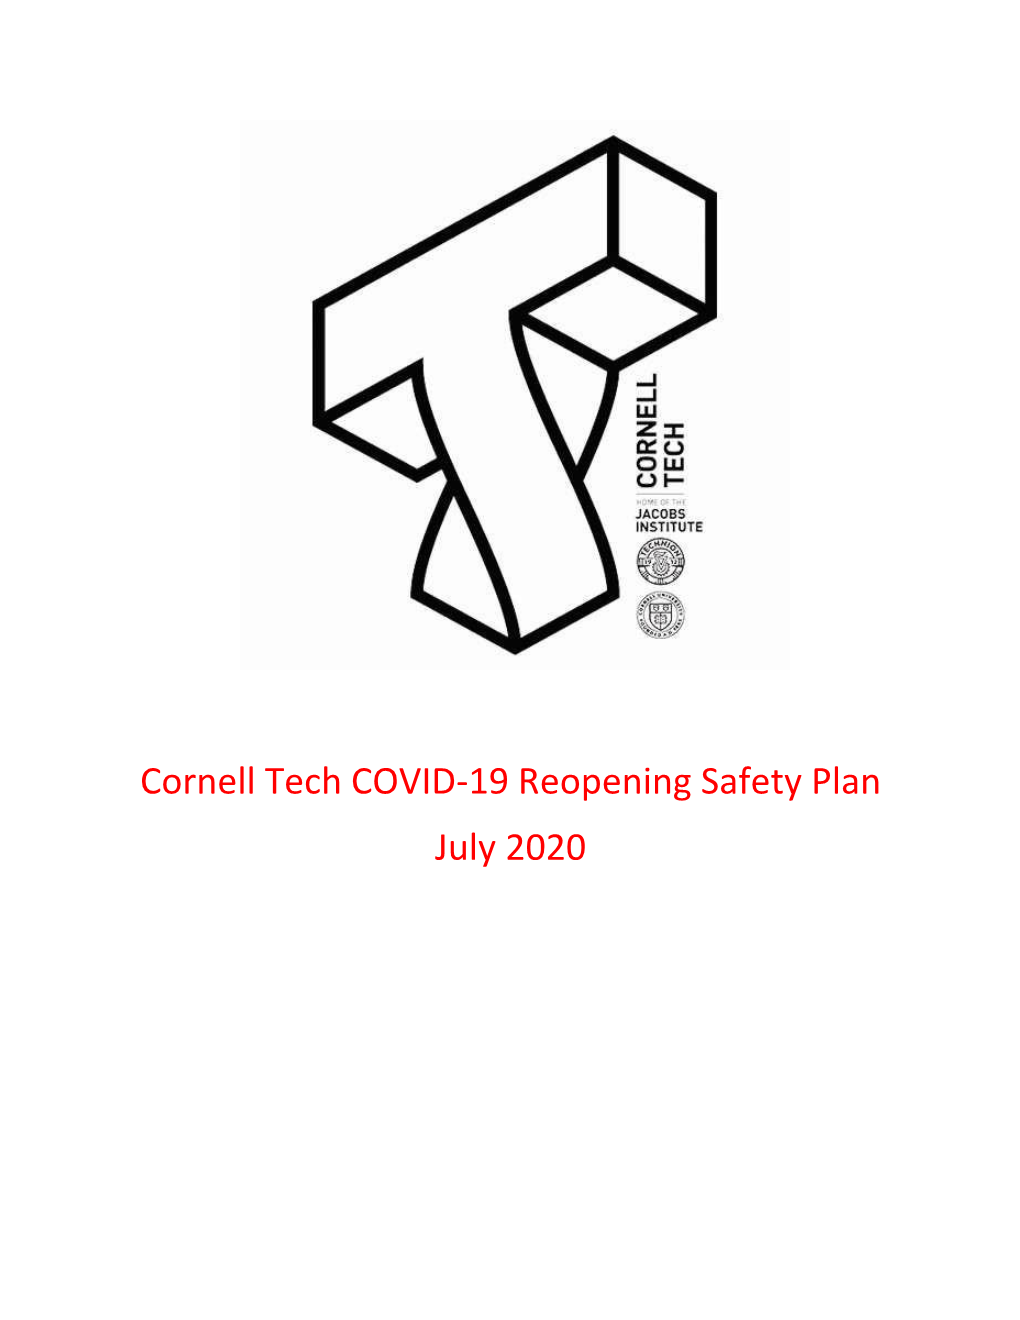 Cornell Tech COVID-19 Reopening Safety Plan July 2020